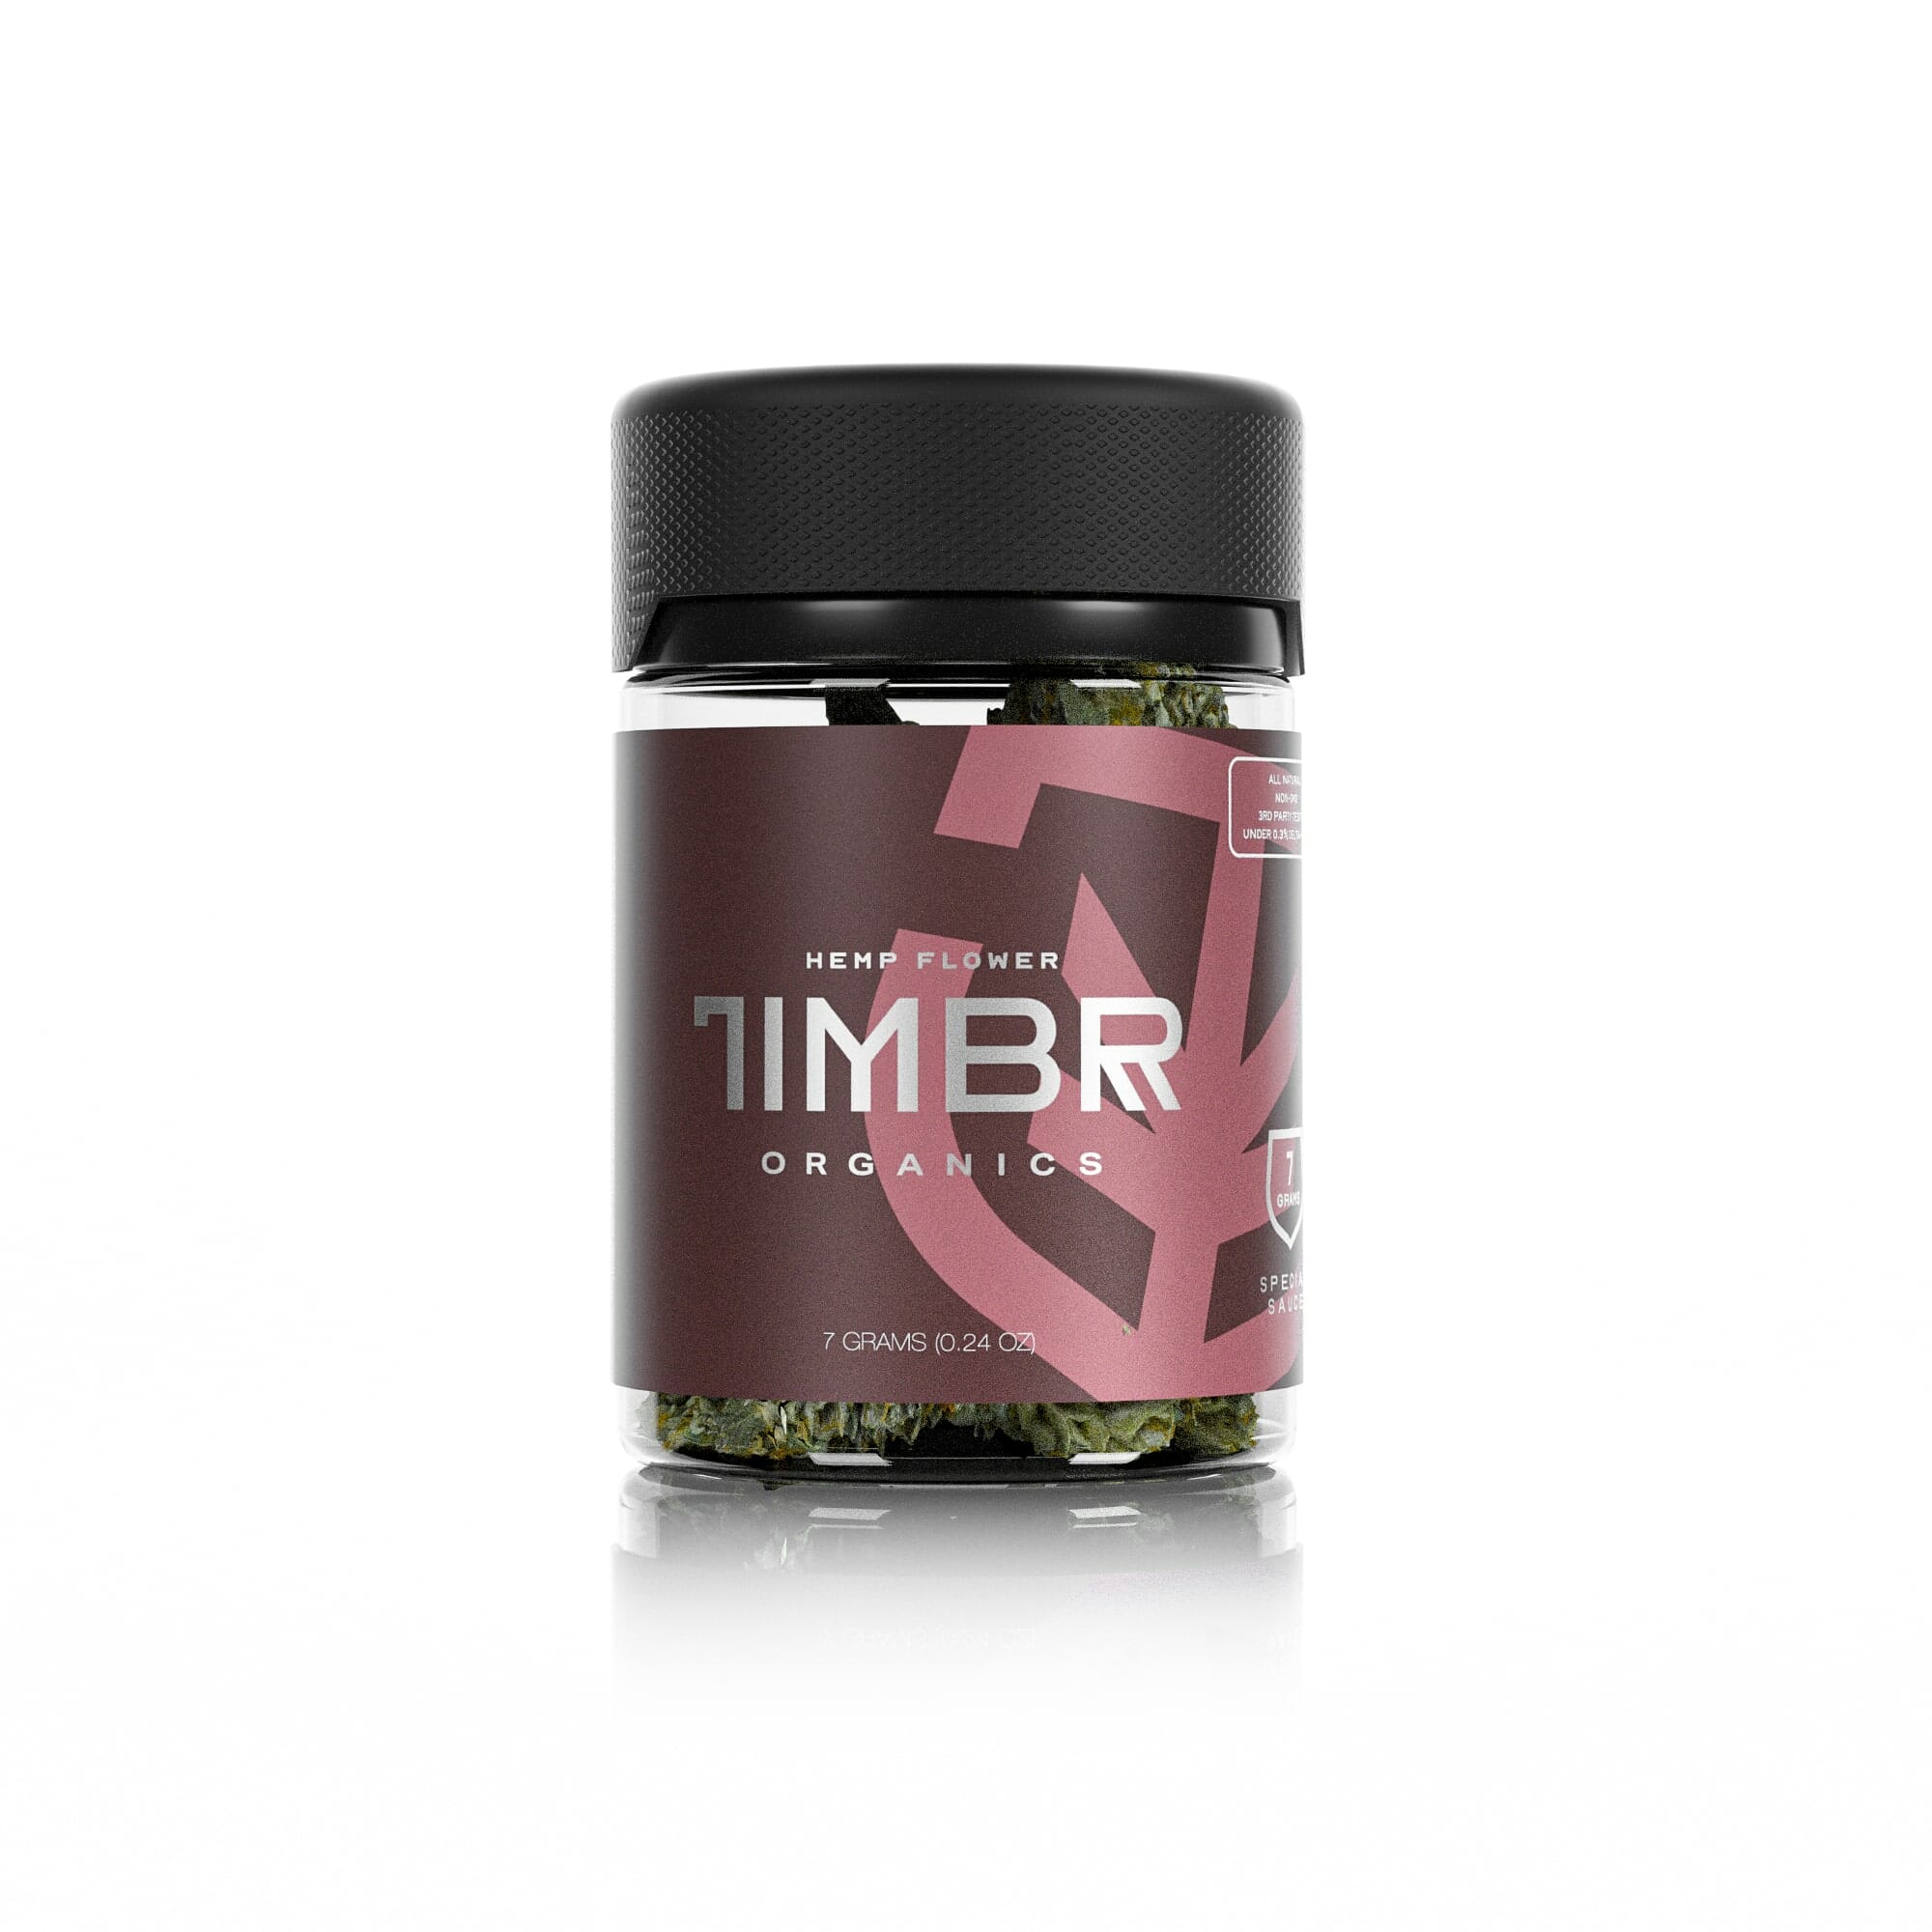 Hemp Flower By Timbrorganics-The Ultimate Hemp Flower Review Uncovering the Finest Varieties